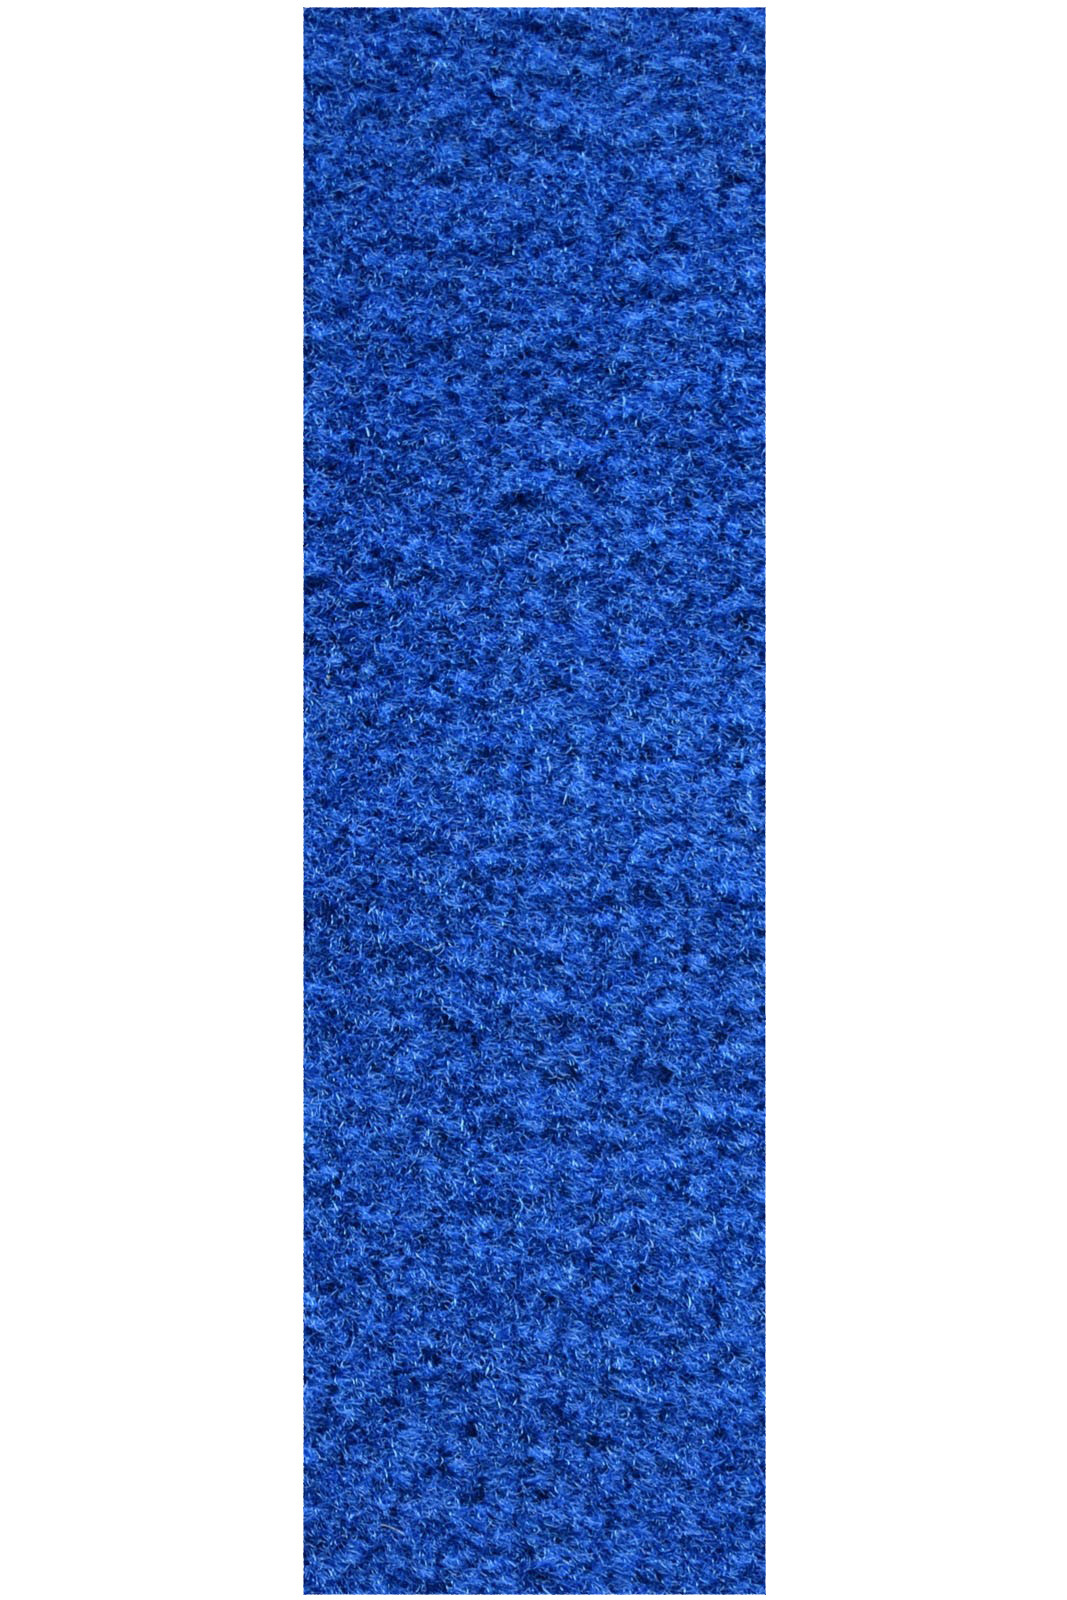 Commercial Indoor/Outdoor Blue Custom Size Runner 3' x 14' - Area Rug with Rubber Marine Backing for Patio, Porch, Deck, Boat, Basement or Garage with Premium Bound Polyester Edges - image 1 of 1